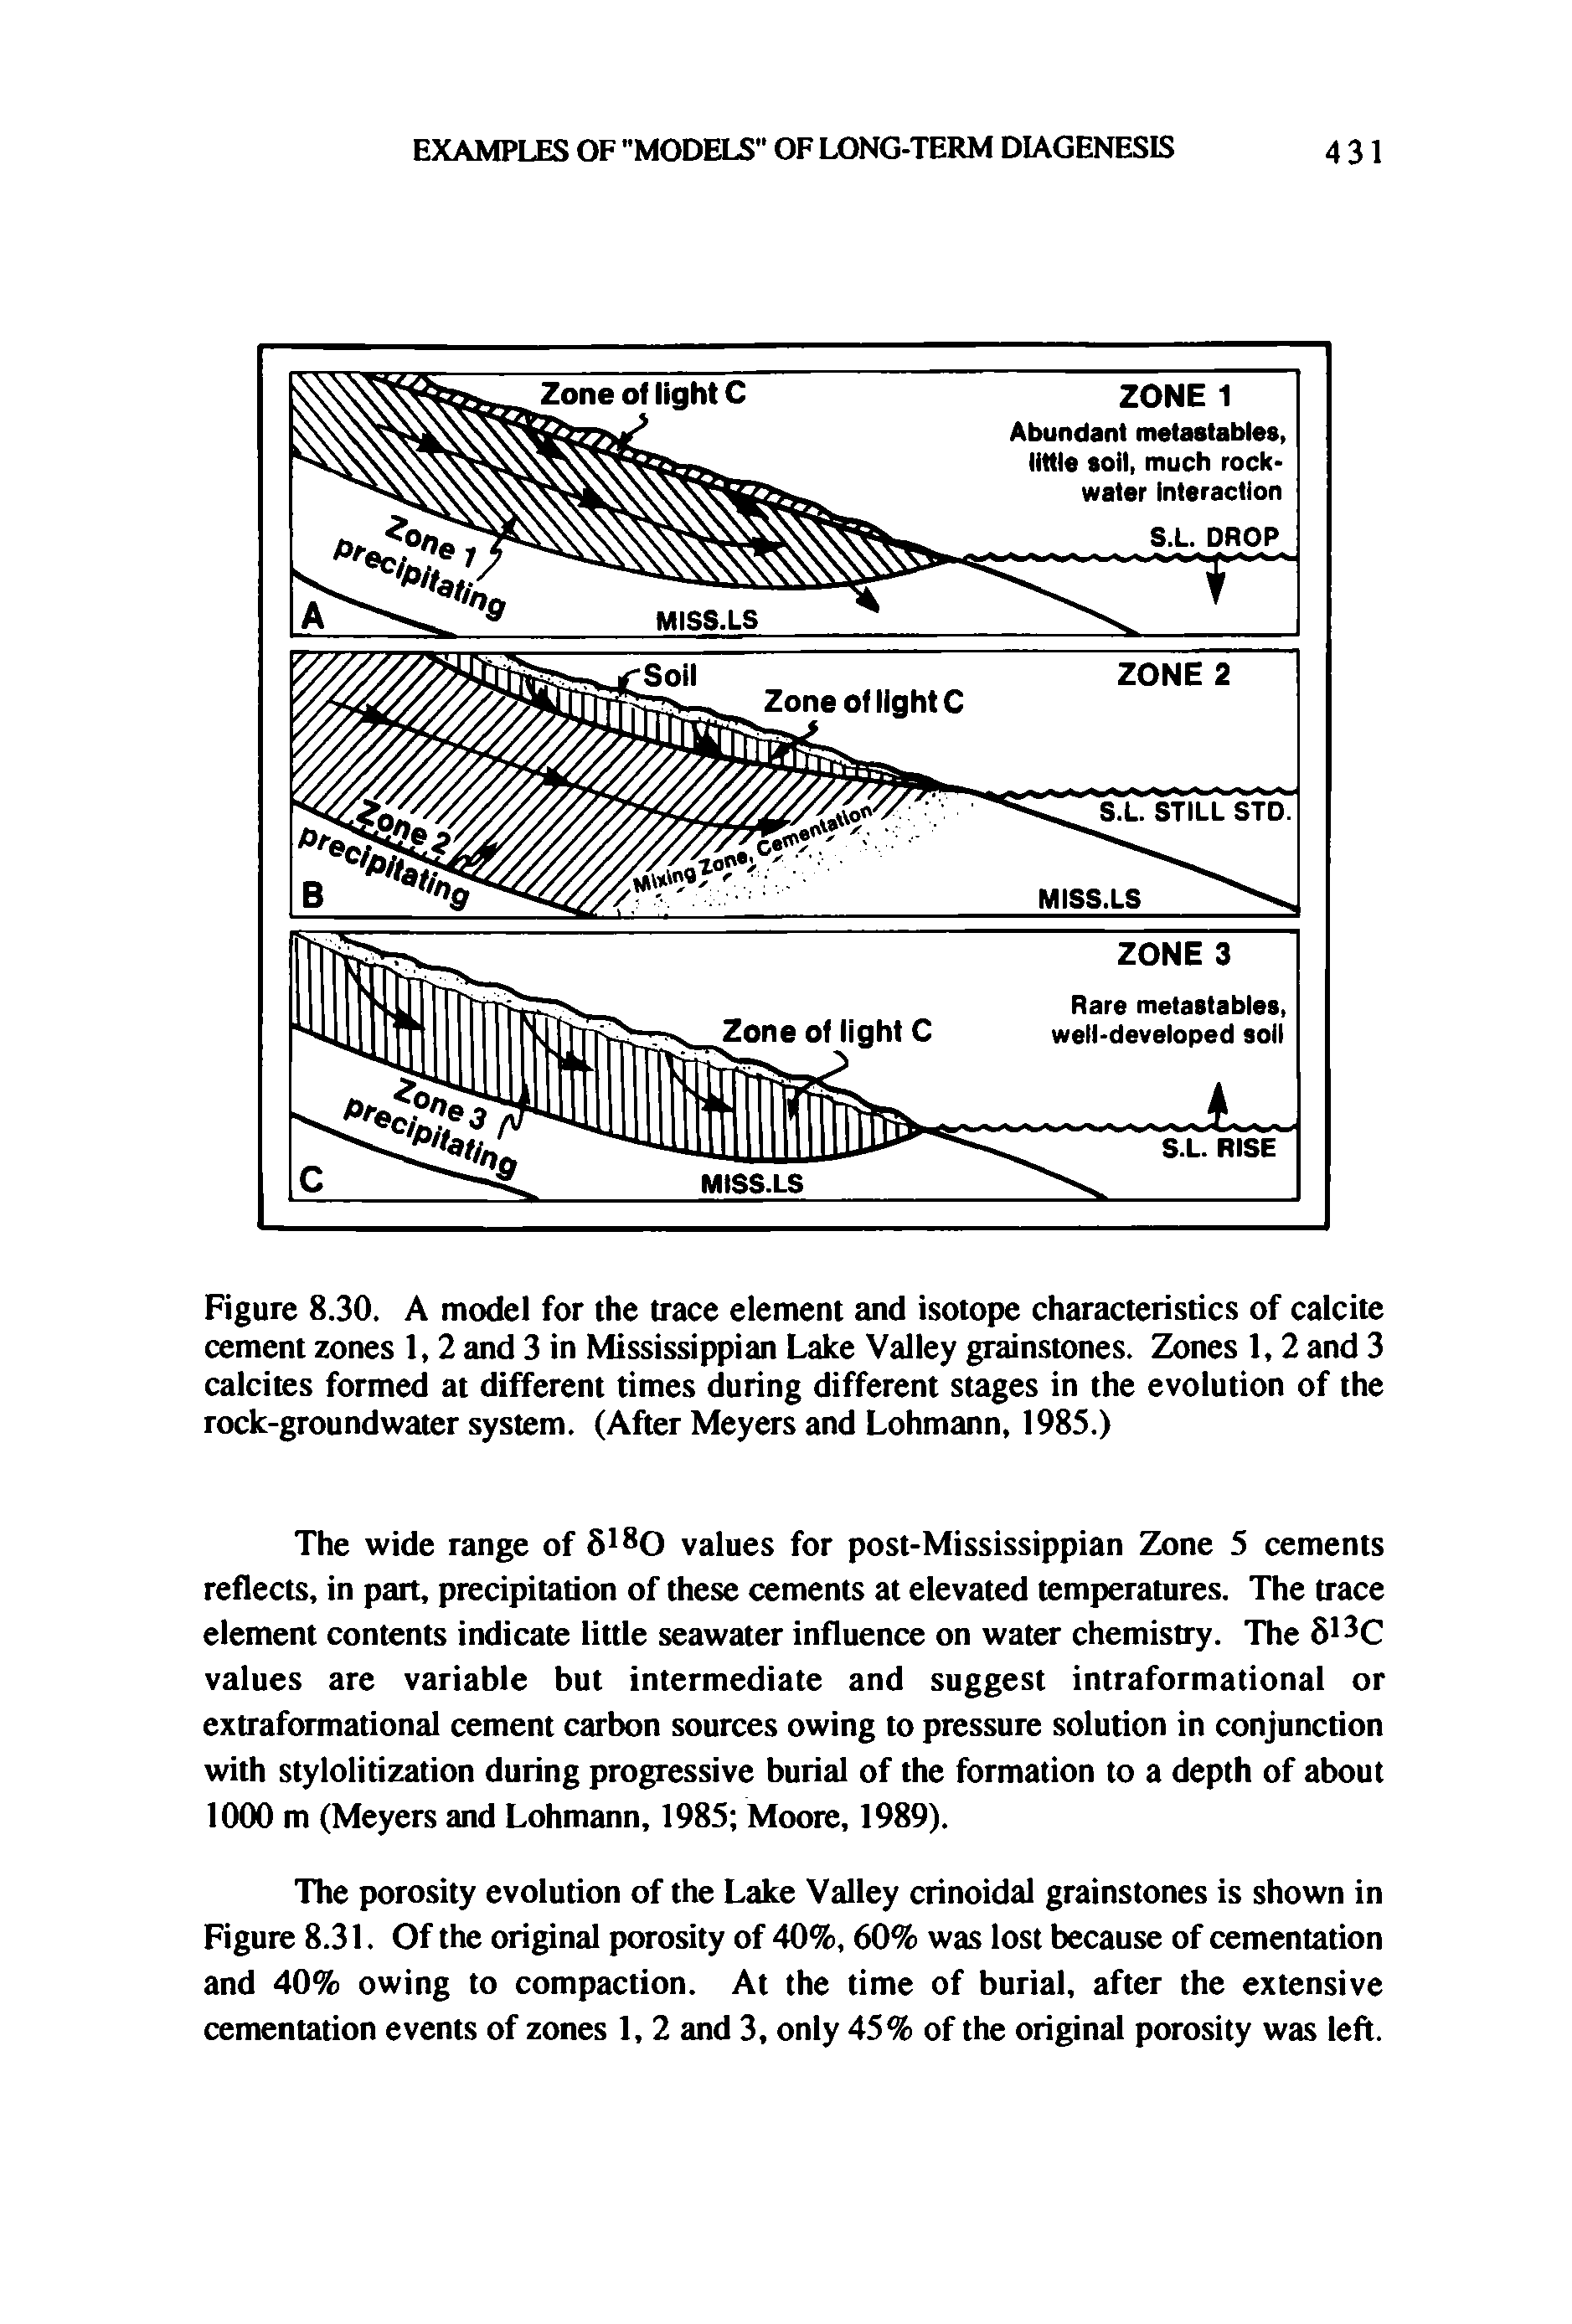 Figure 8.30. A model for the trace element and isotope characteristics of calcite cement zones 1,2 and 3 in Mississippian Lake Valley grainstones. Zones 1,2 and 3 calcites formed at different times during different stages in the evolution of the rock-groundwater system. (After Meyers and Lohmann, 1985.)...